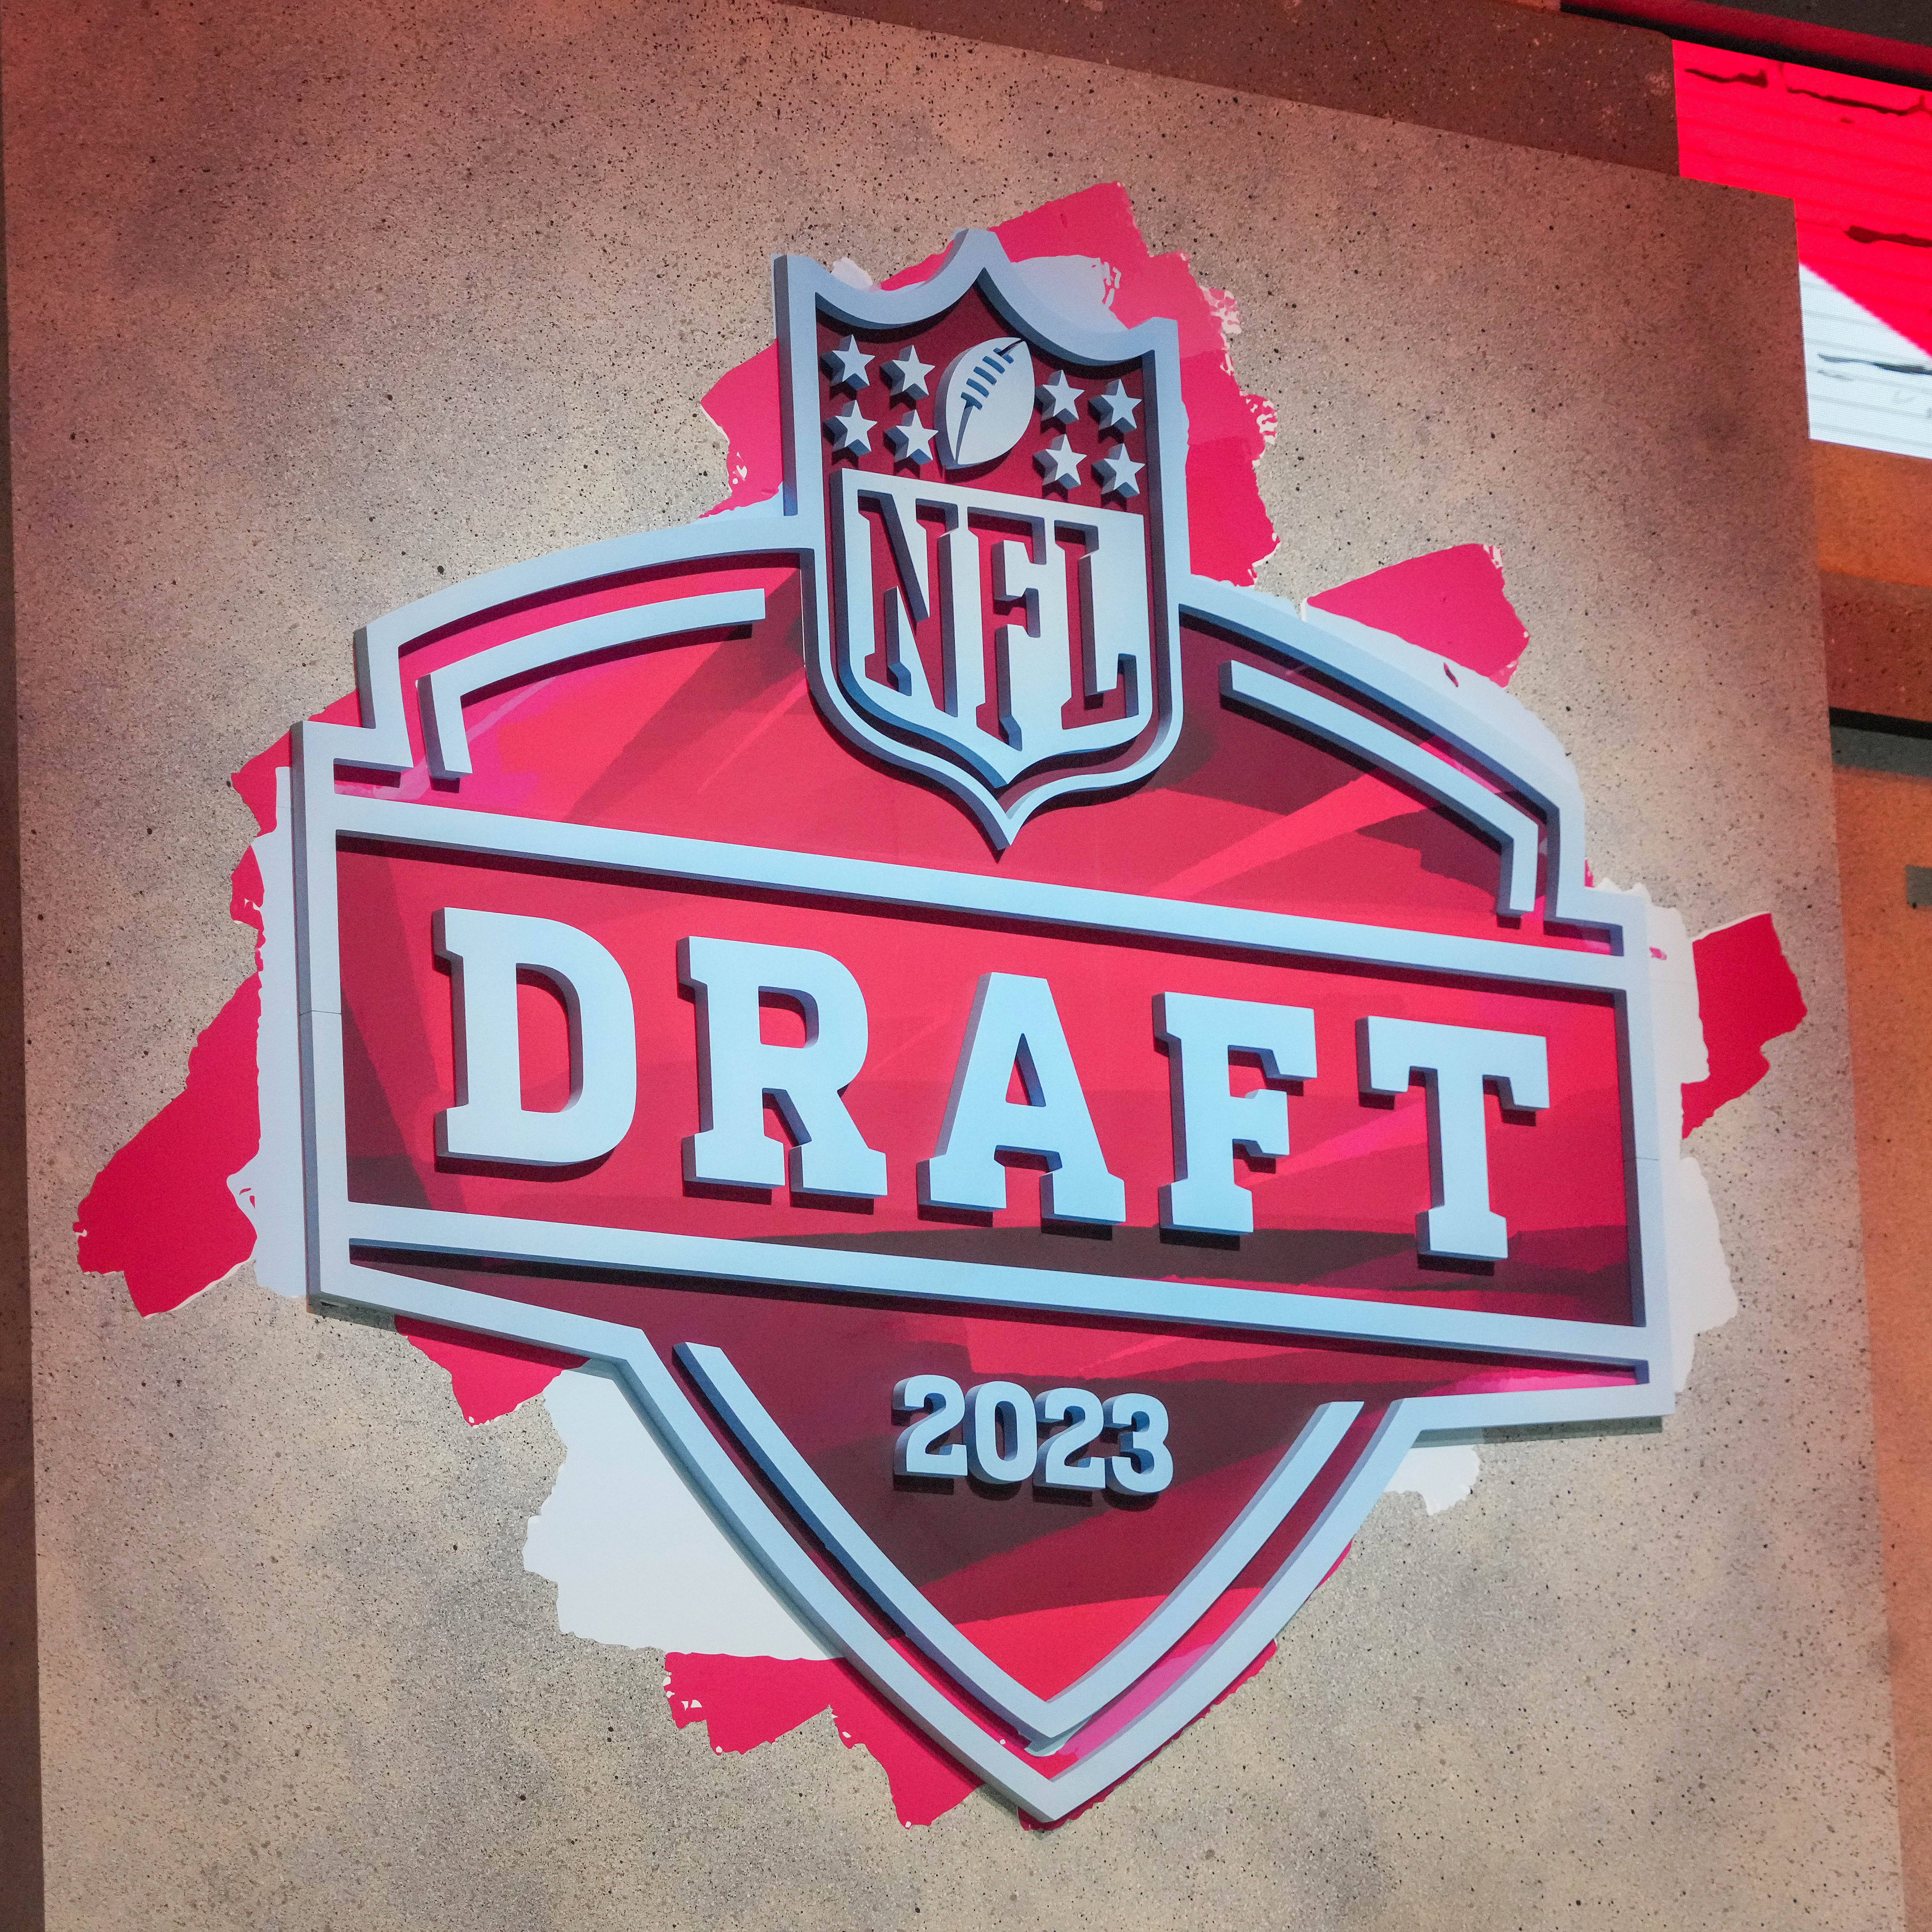 A general view of the NFL Draft 2023 sign at Union Station.